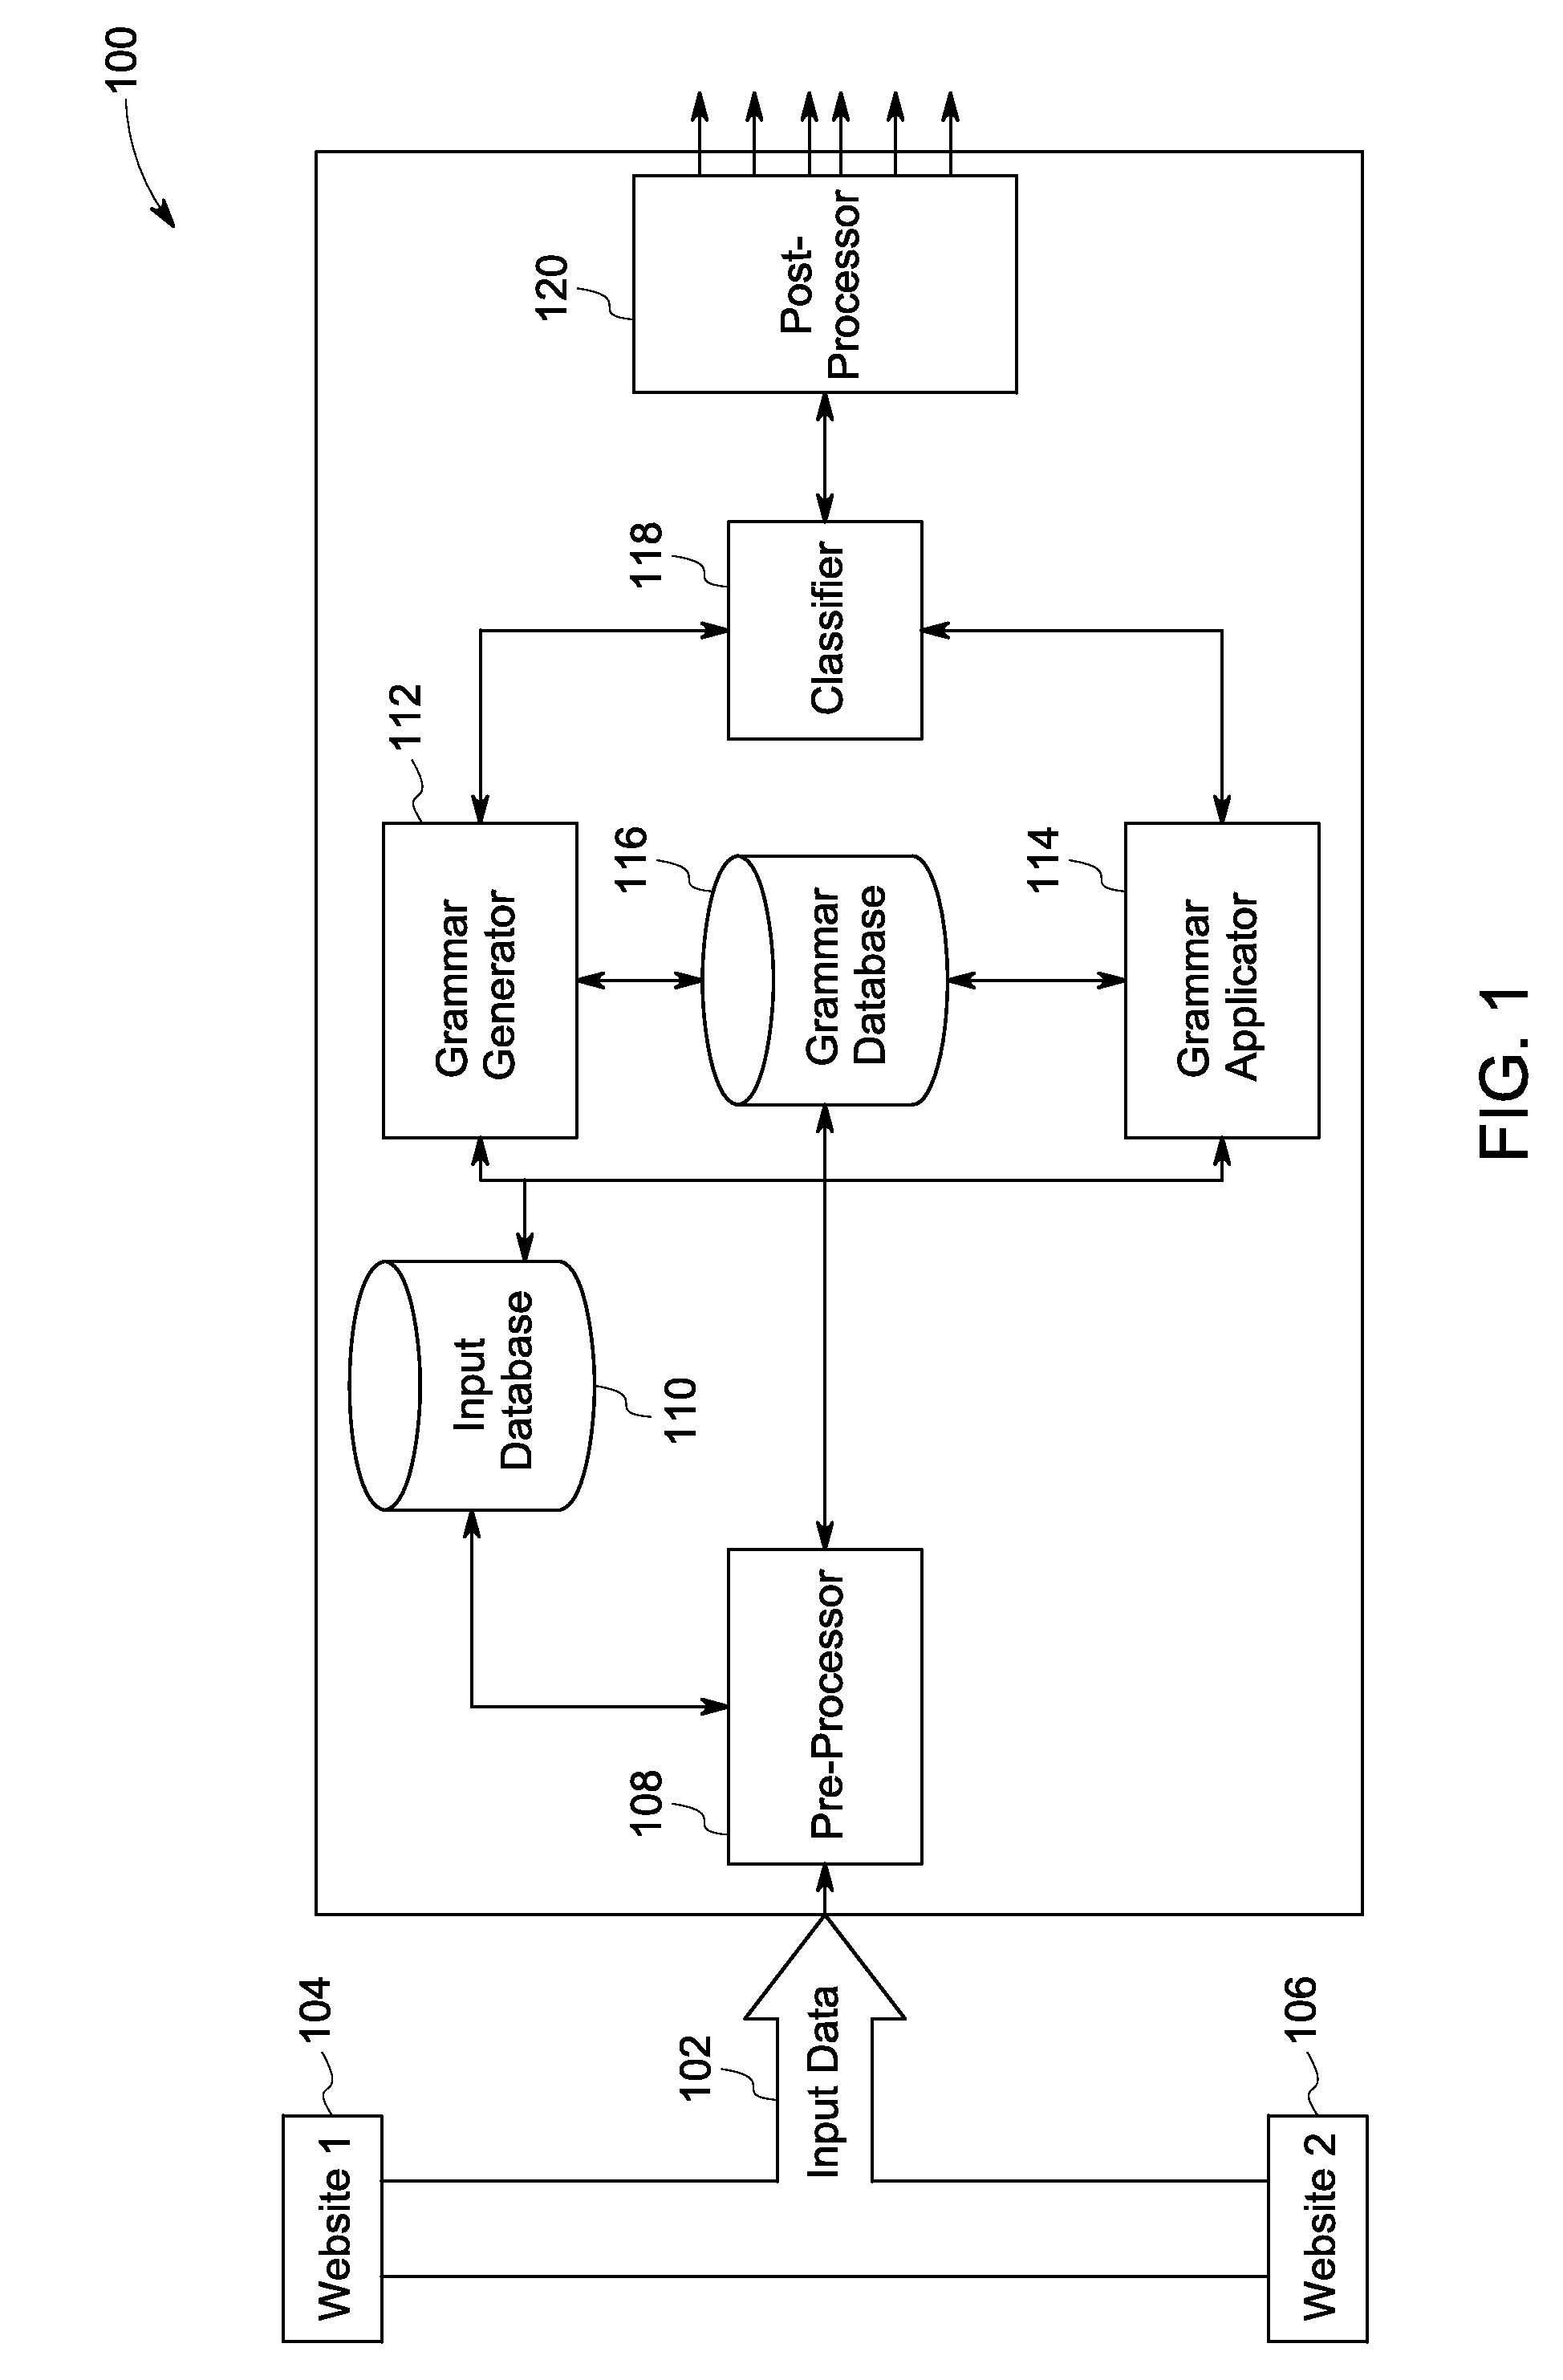 System and method for web mining and clustering